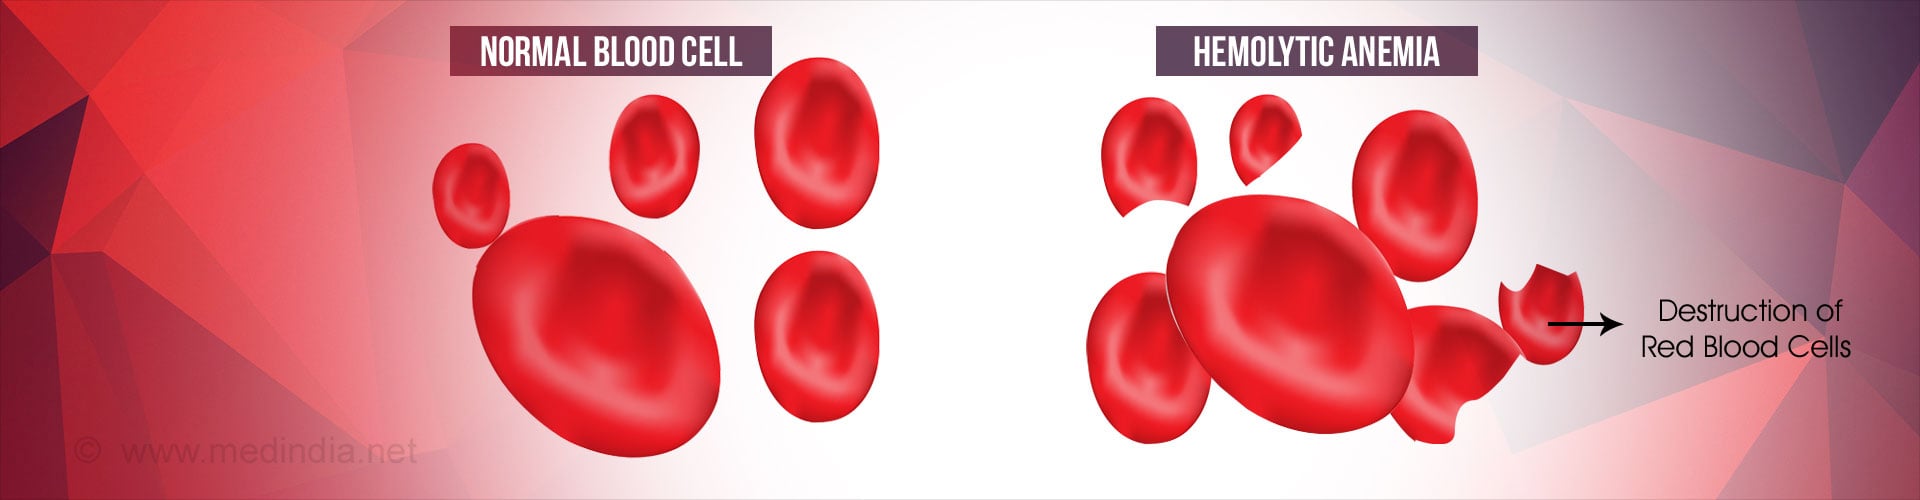 What are some symptoms of hemolytic anemia?